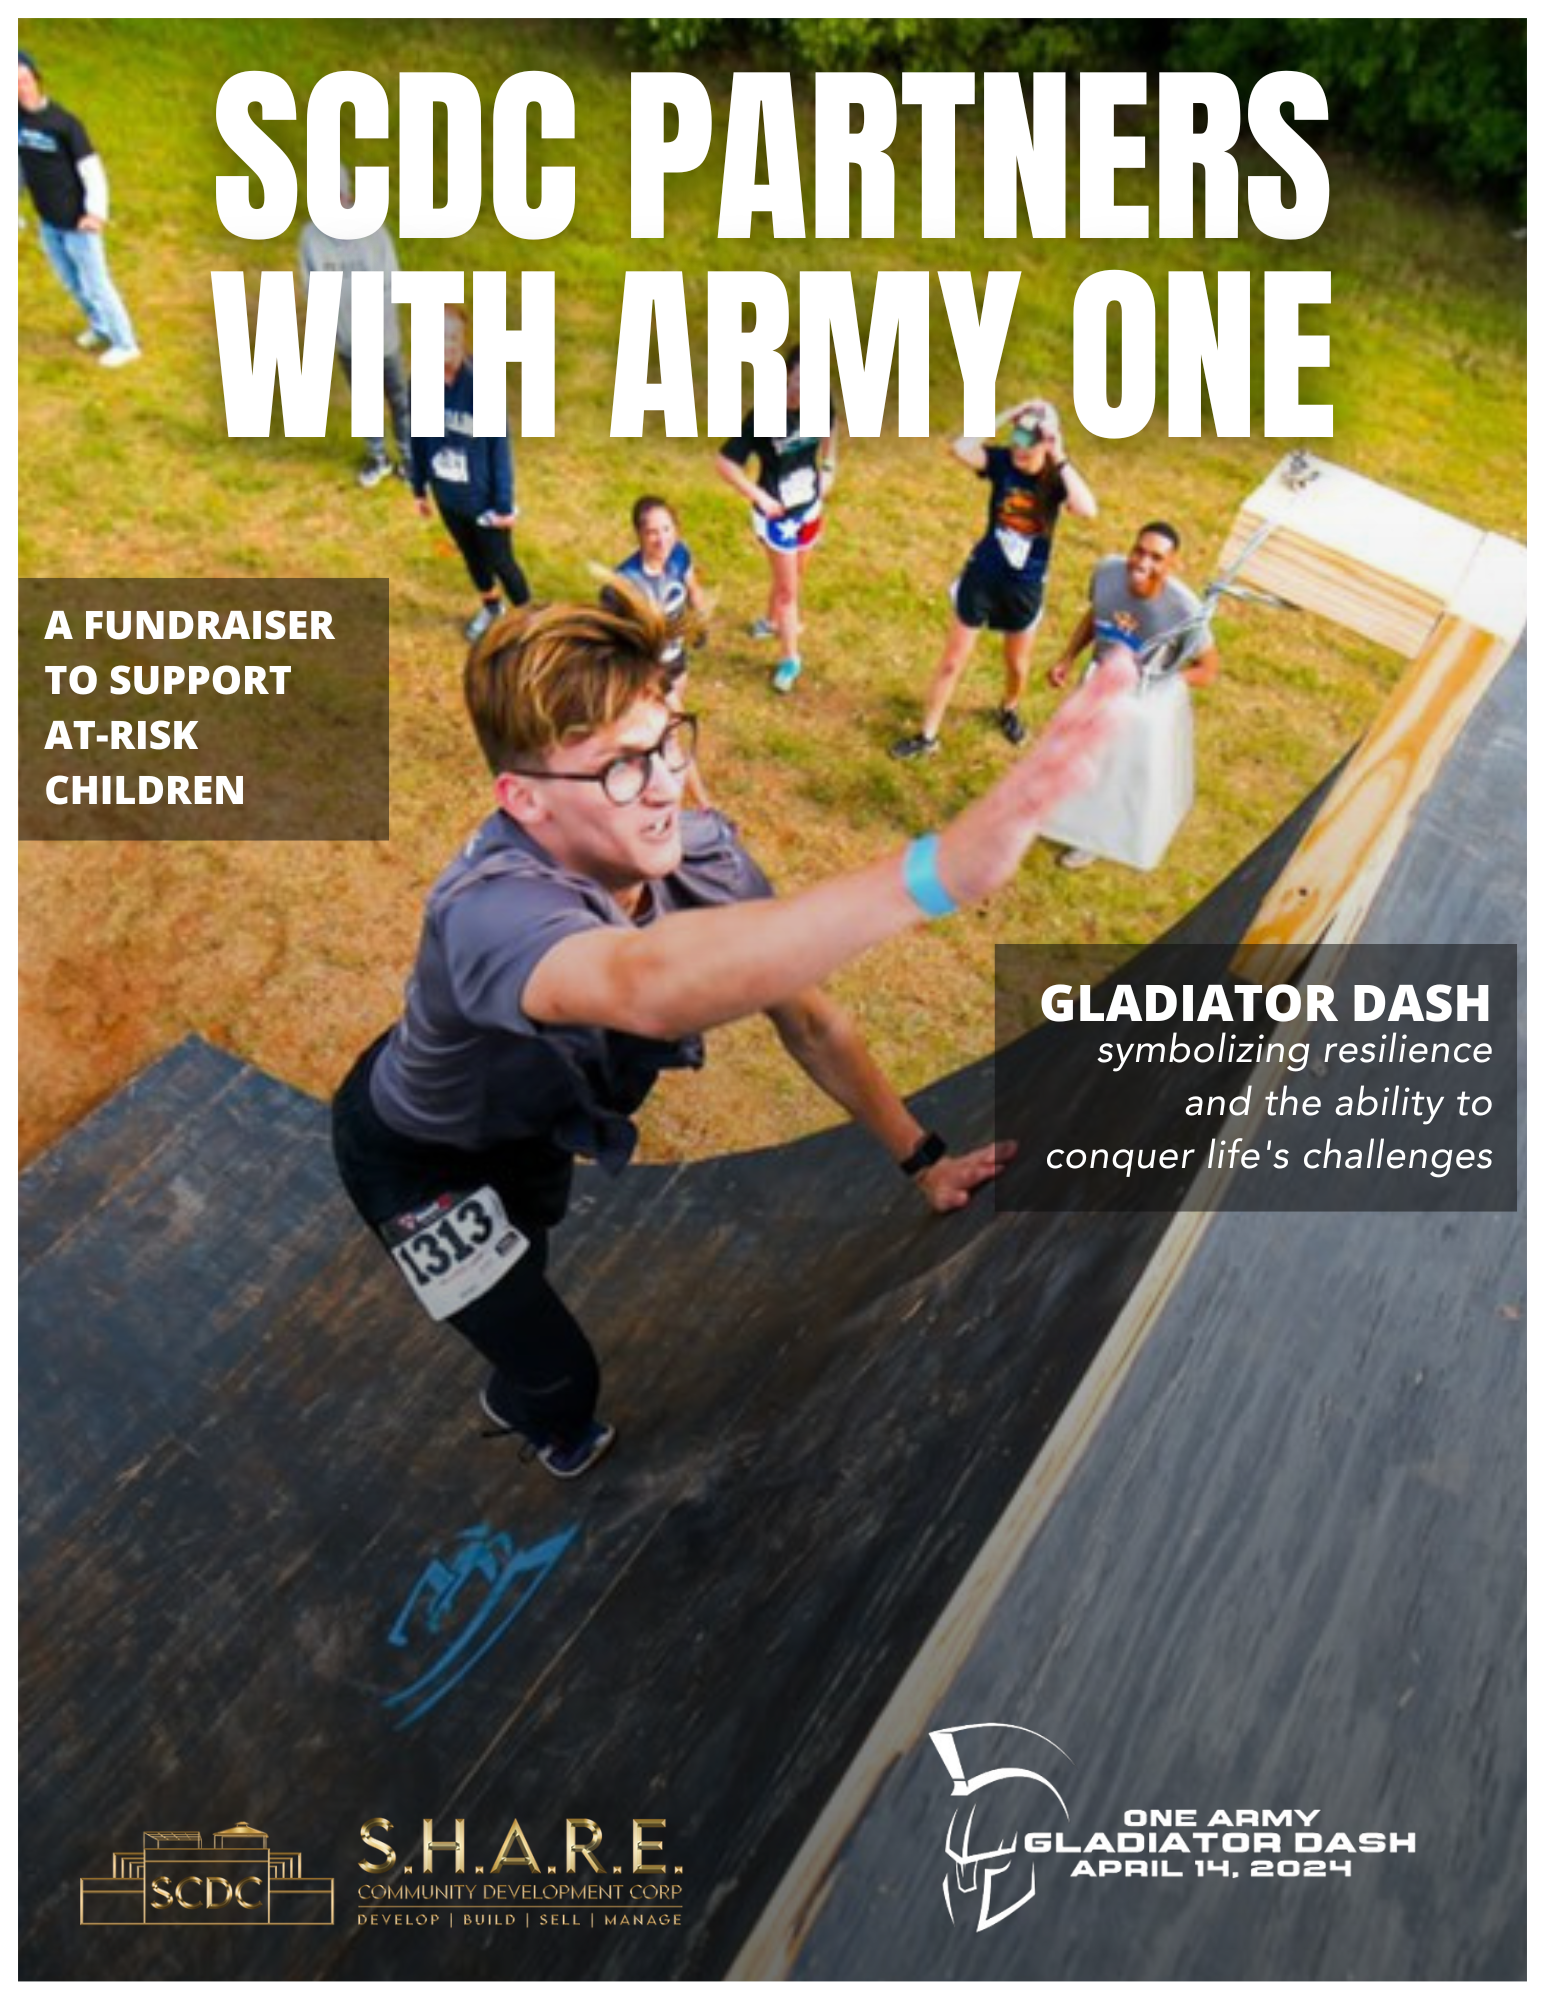 SCDC PARTNERS WITH ARMY ONE THROUGH THEIR ANNUAL GLADIATOR DASH TO SUPPORT AT-RISK CHILDREN